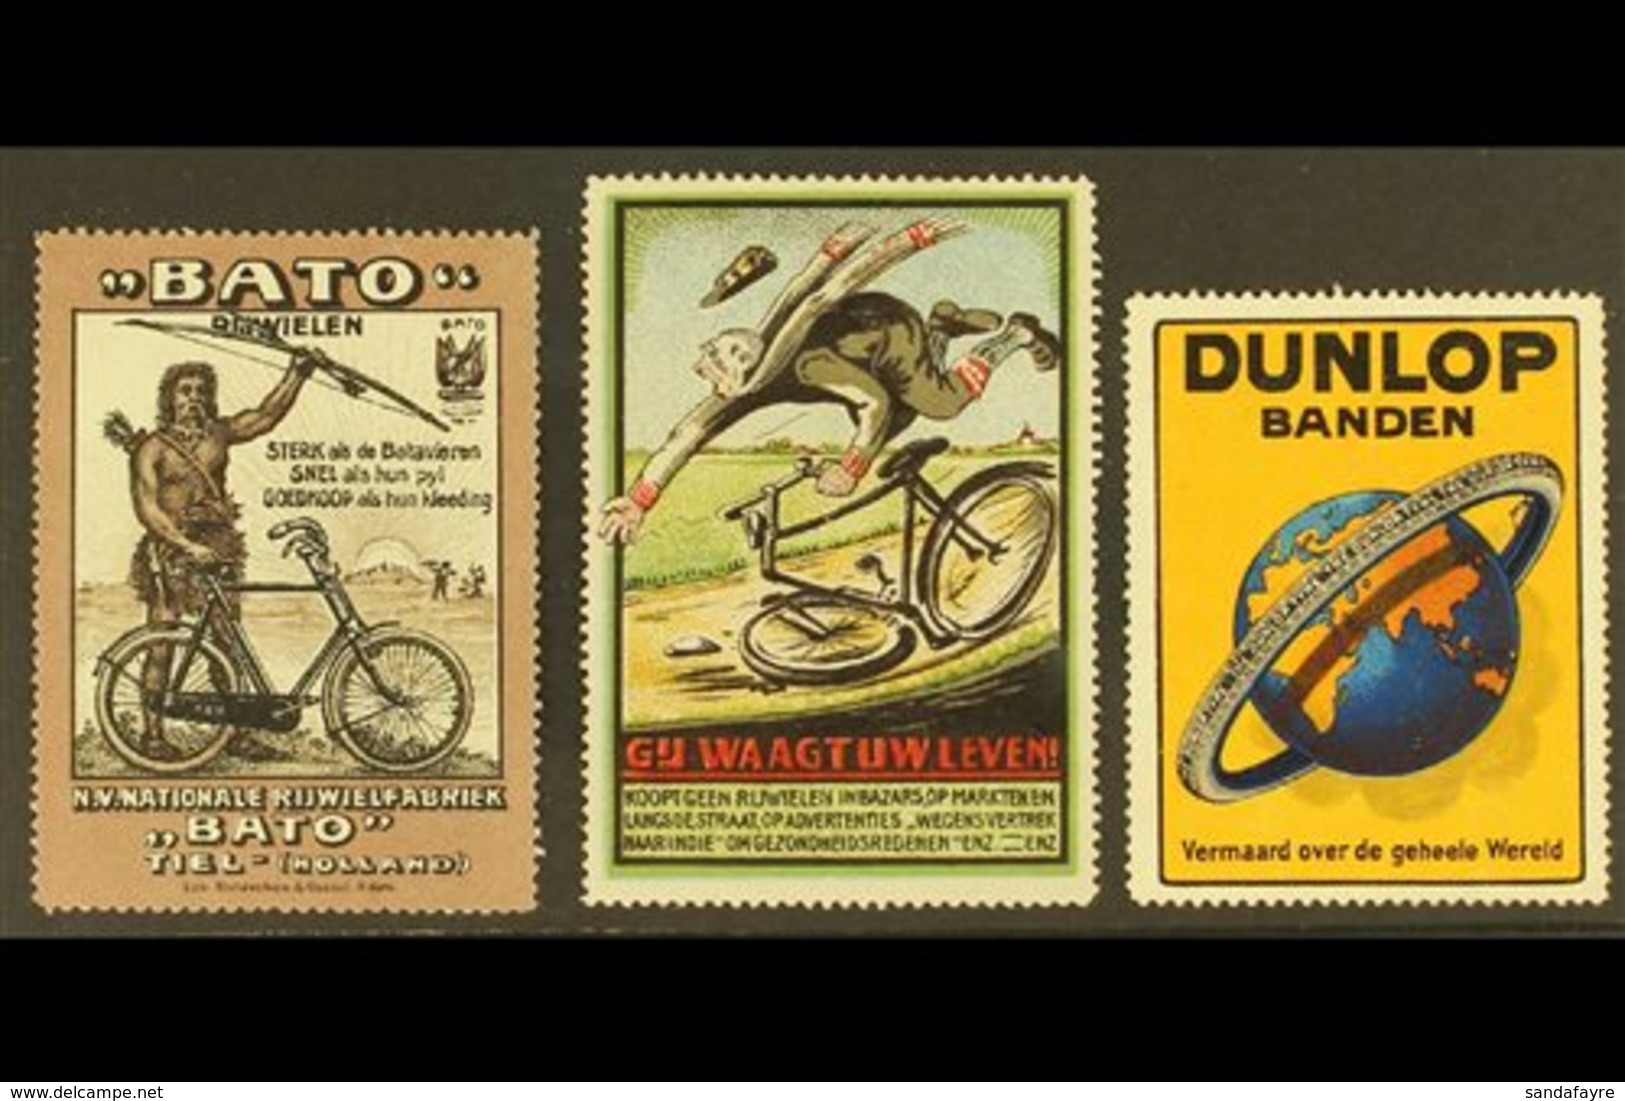 CYCLING BICYCLES 1900's-1930's Interesting Group Of Colourful Advertising Labels All Featuring Cycle Themes, Unused No G - Zonder Classificatie